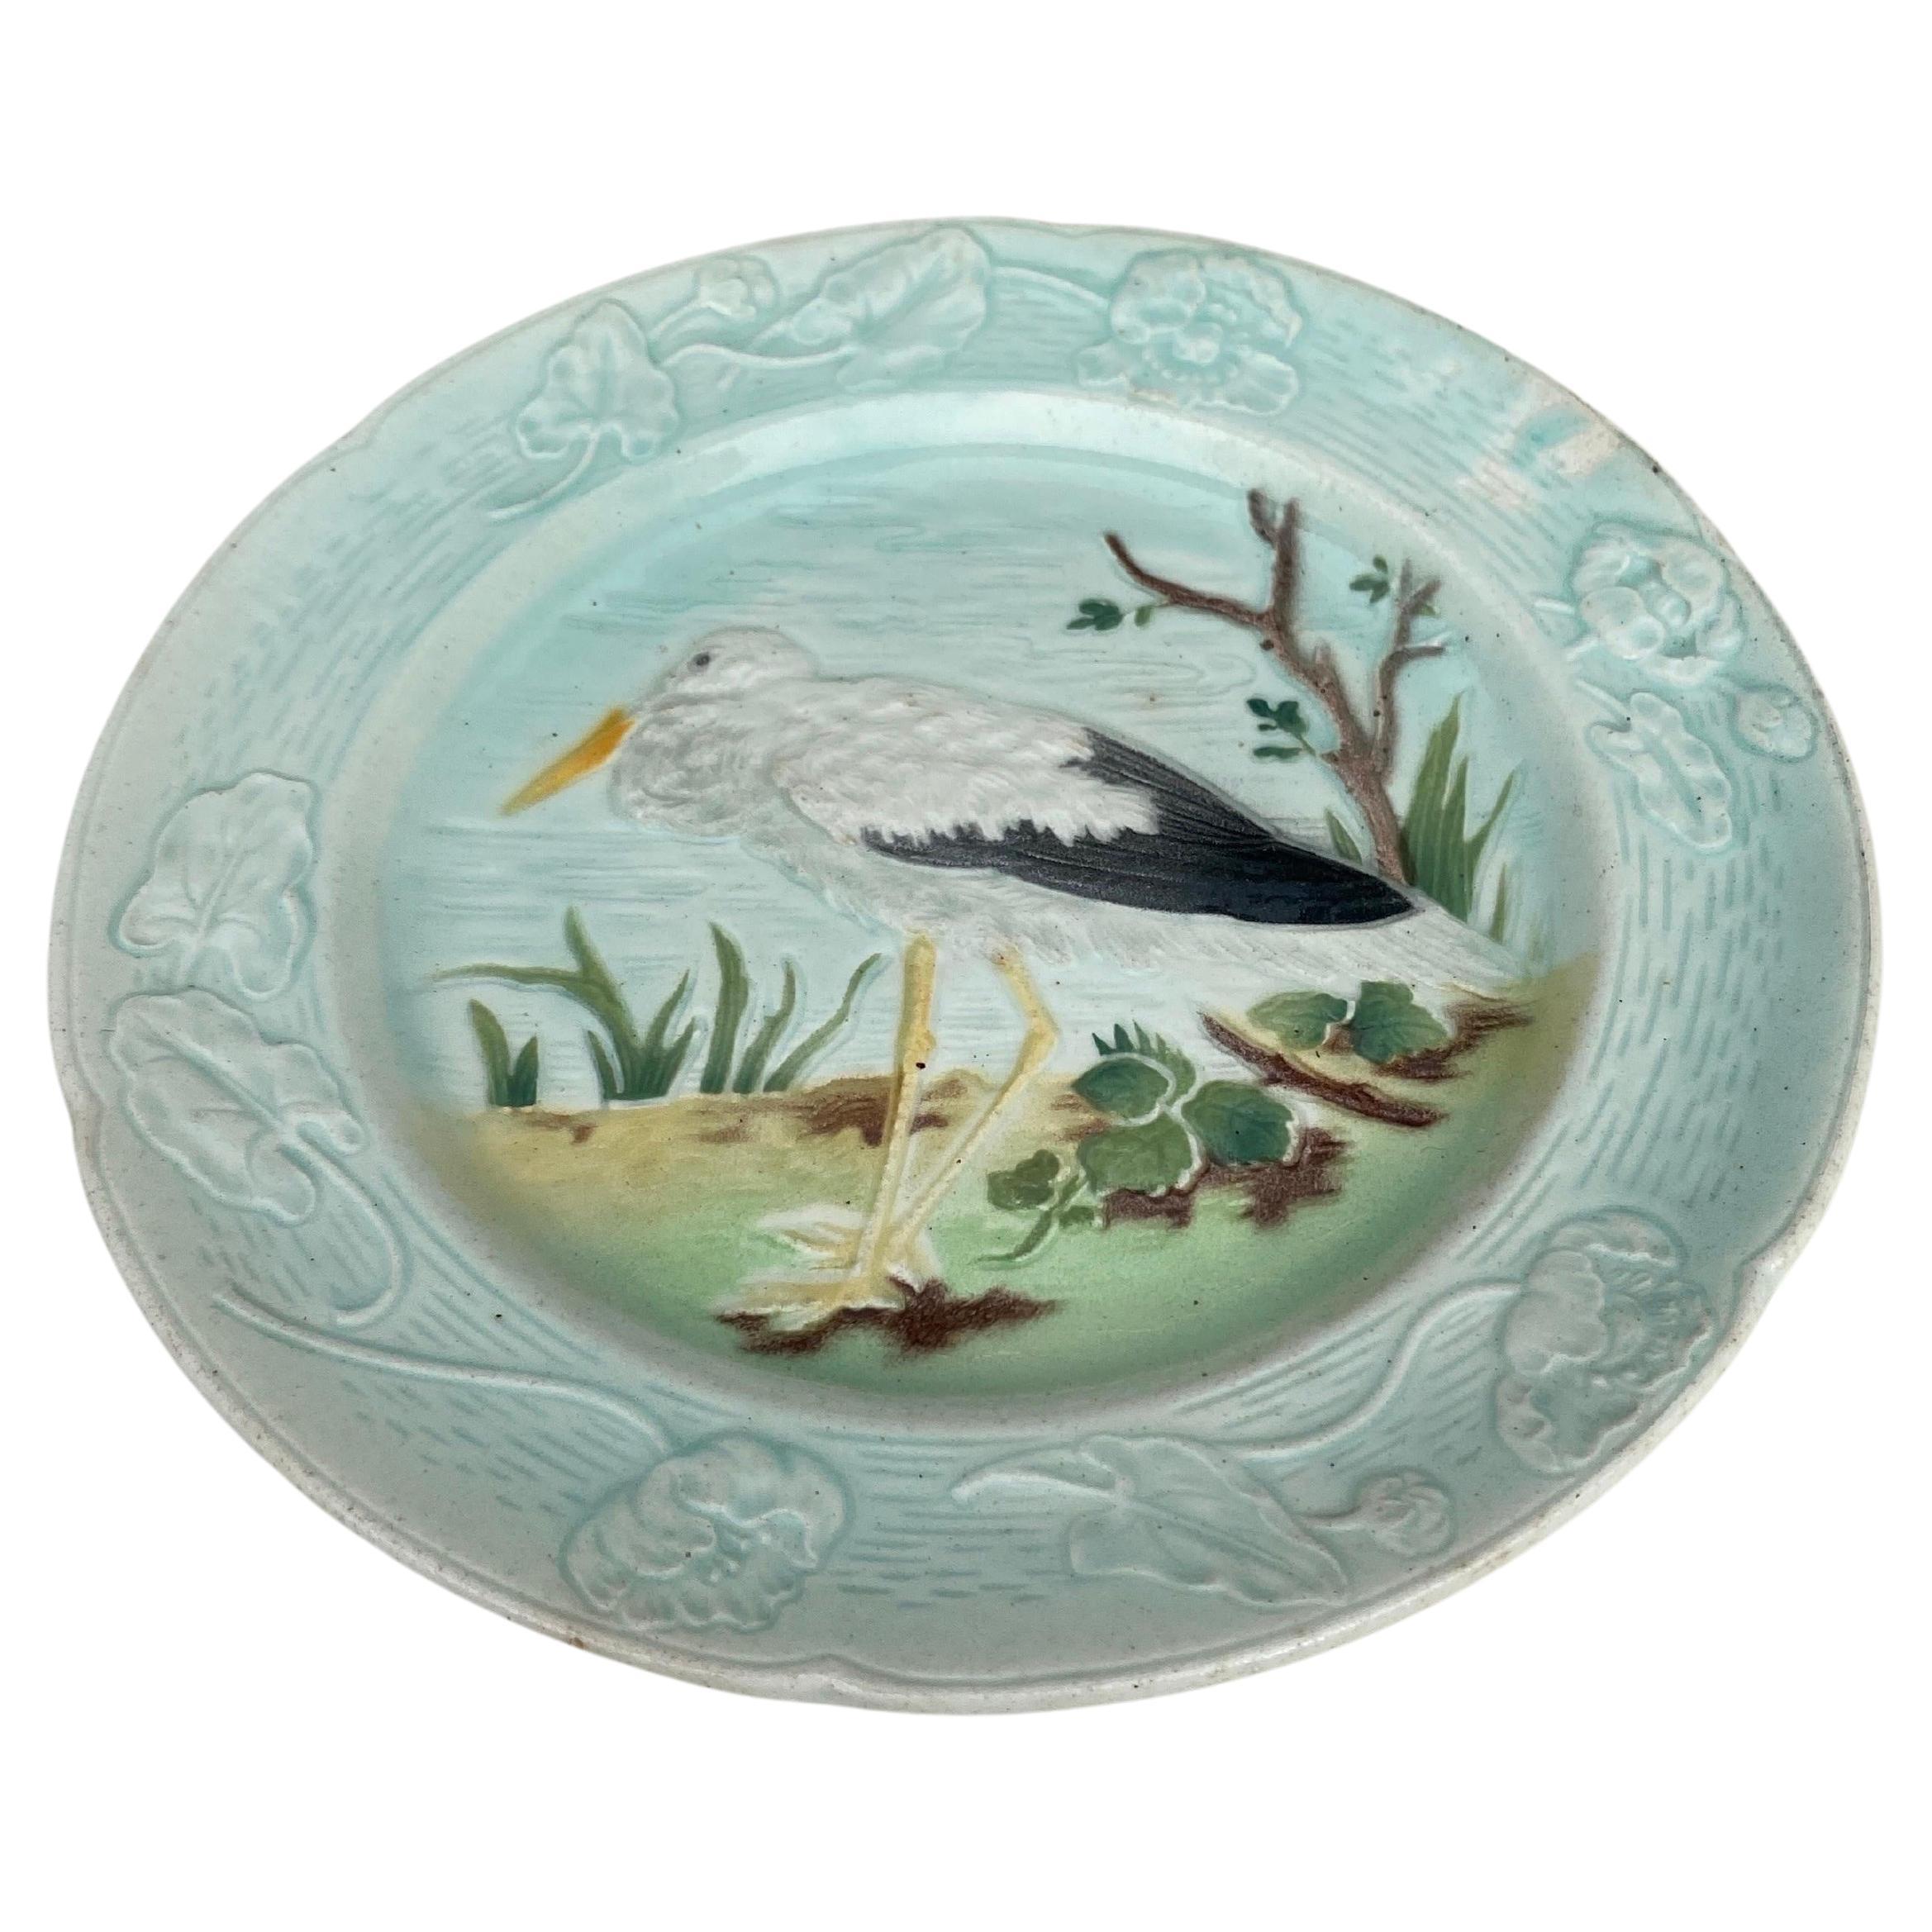 Rustic French Majolica Stork Plate Keller & Guerin Saint Clement, Circa 1900 For Sale